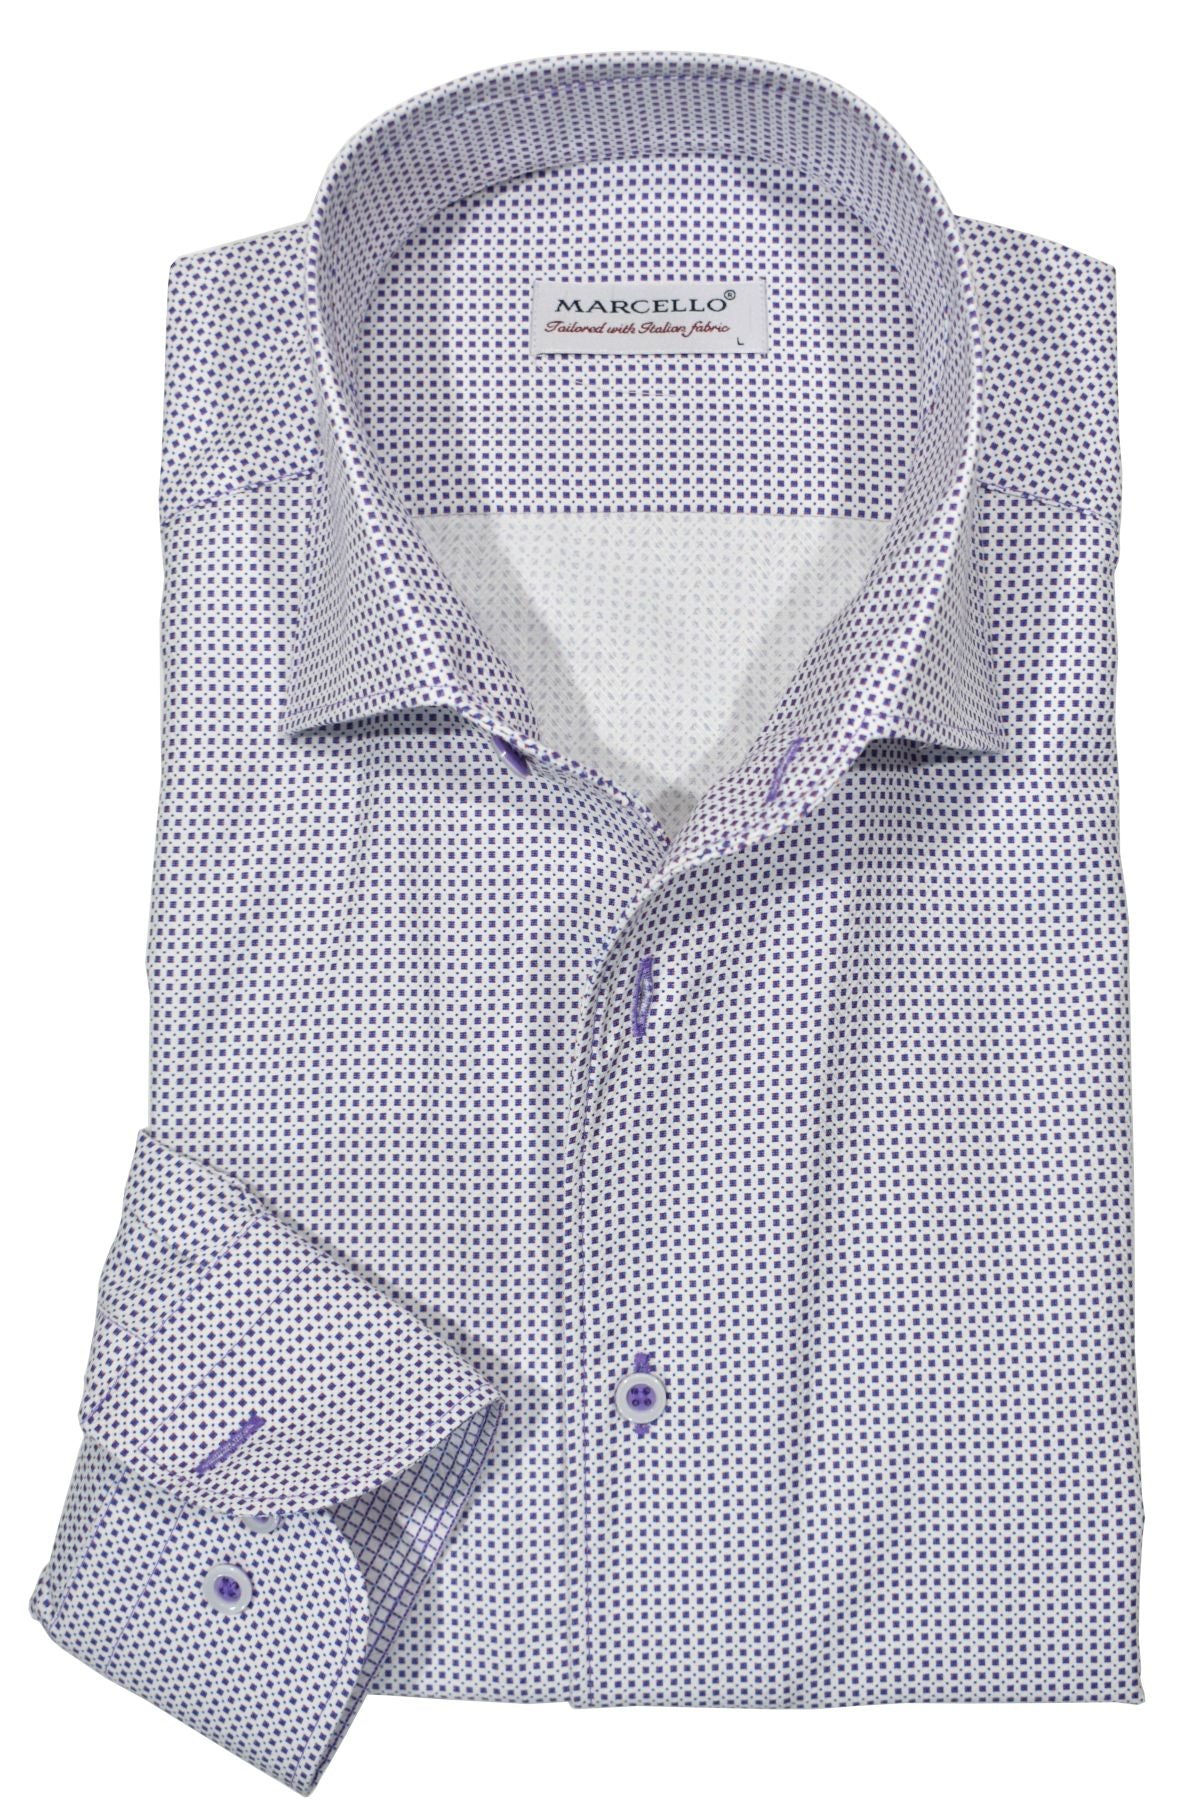 Featuring a sophisticated micro-square pattern crafted from an exquisite combination of cotton and microfiber, herringbone fabric, this open-collar shirt adds an eye-catching touch of class to any ensemble. Precisely matched buttons, expert stitching, and a timeless classic shaped silhouette complete the elegant look.